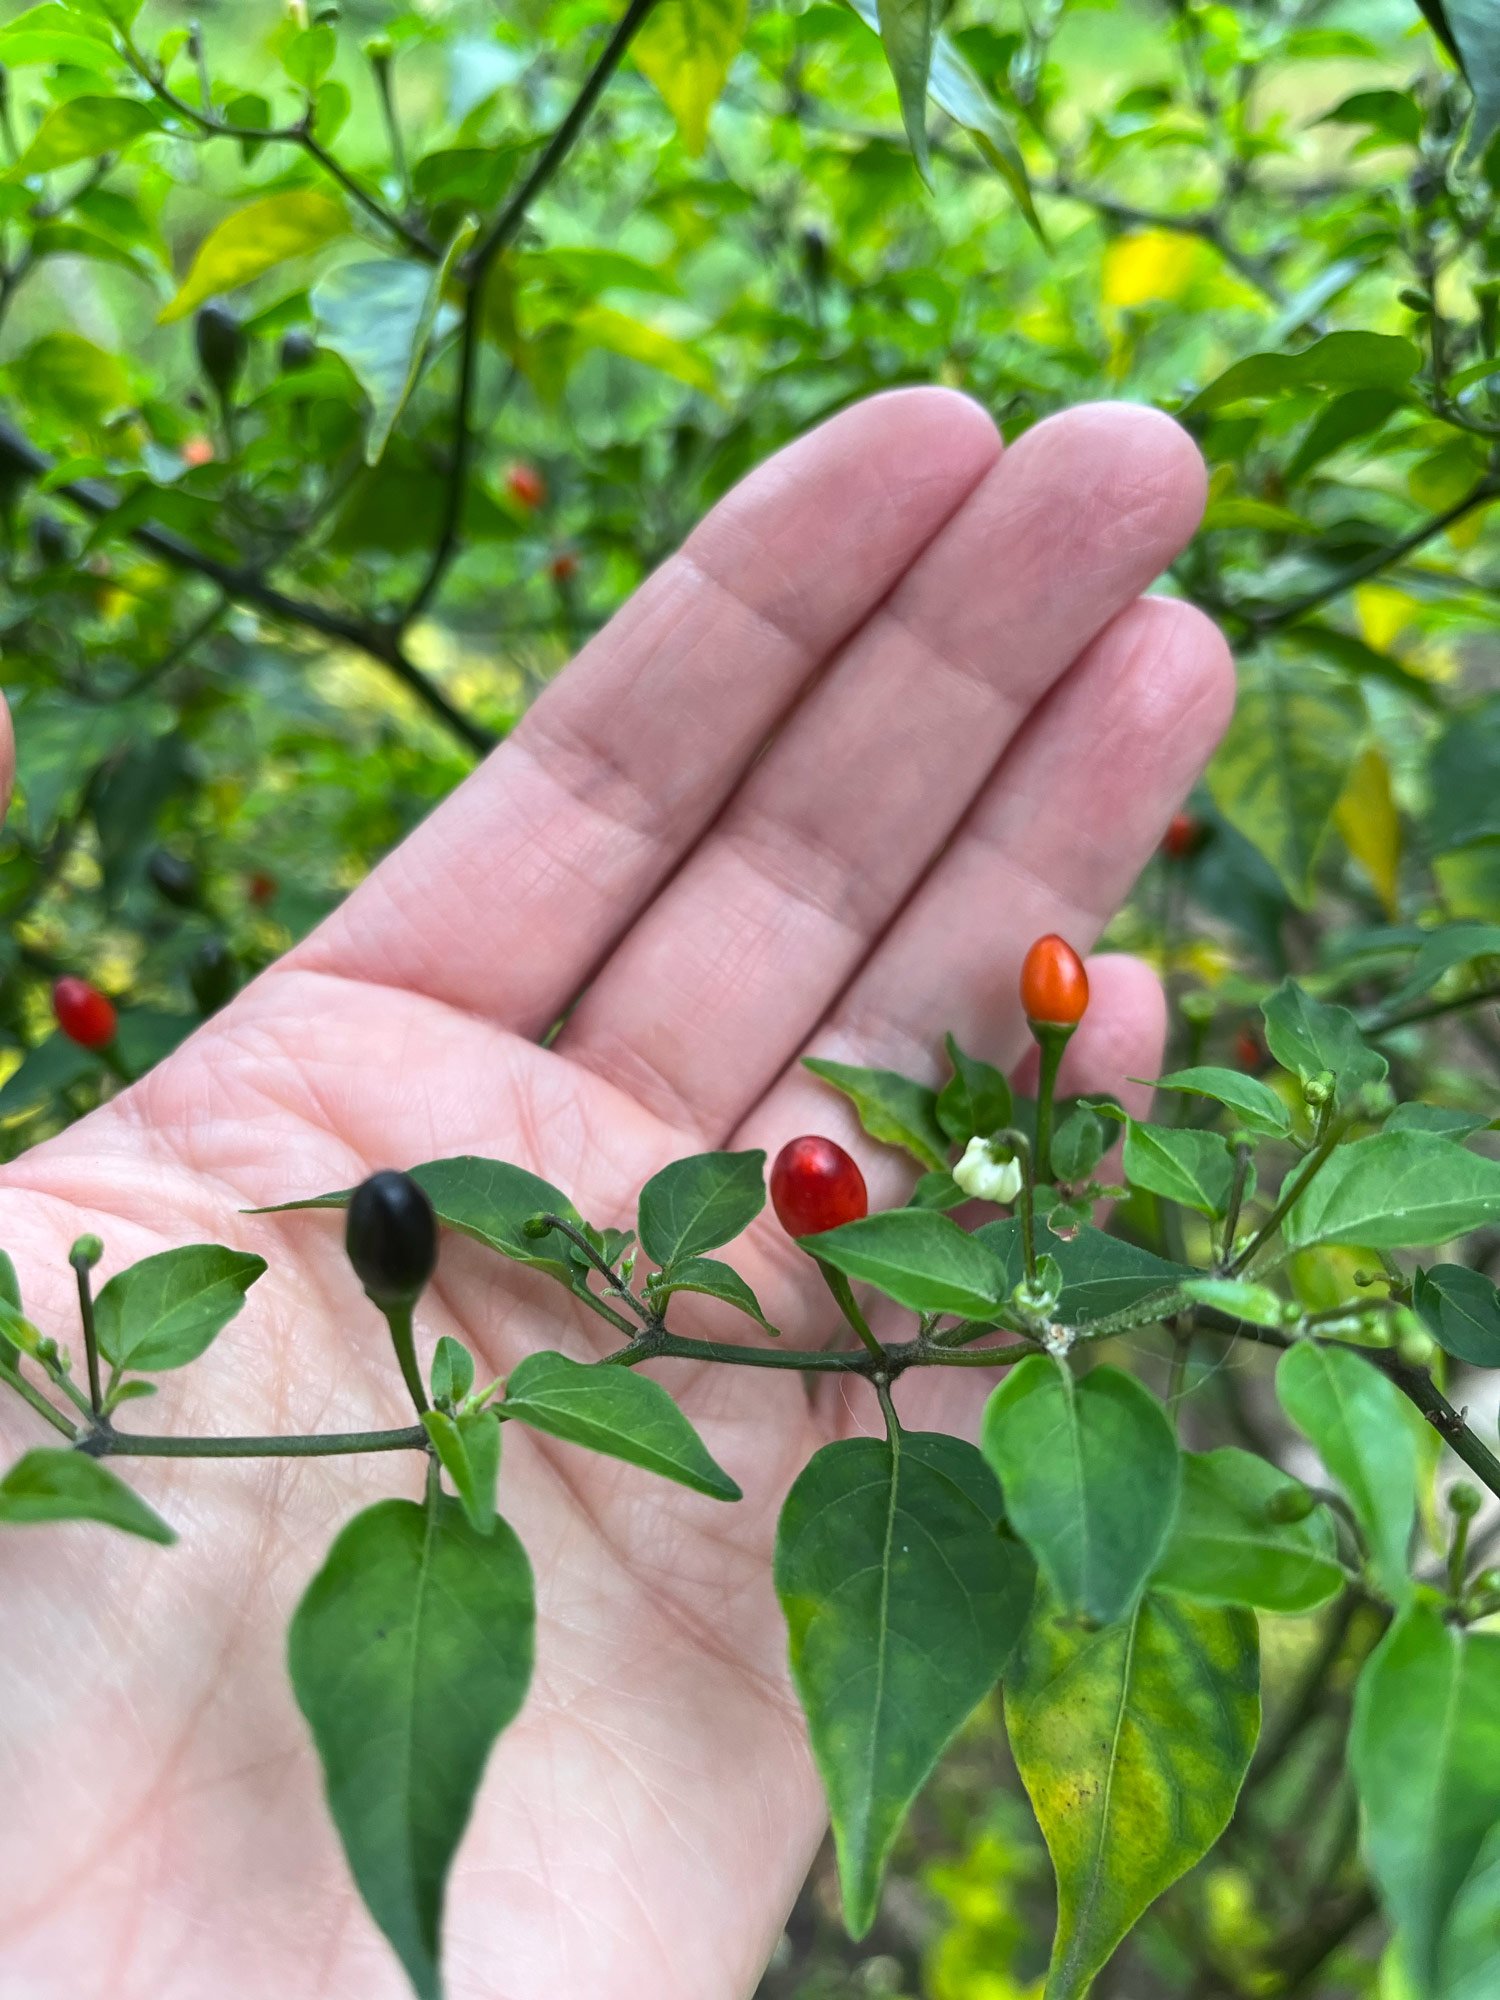 Aji, a chili pepper that ranges in pungency, is used to keeps pests away